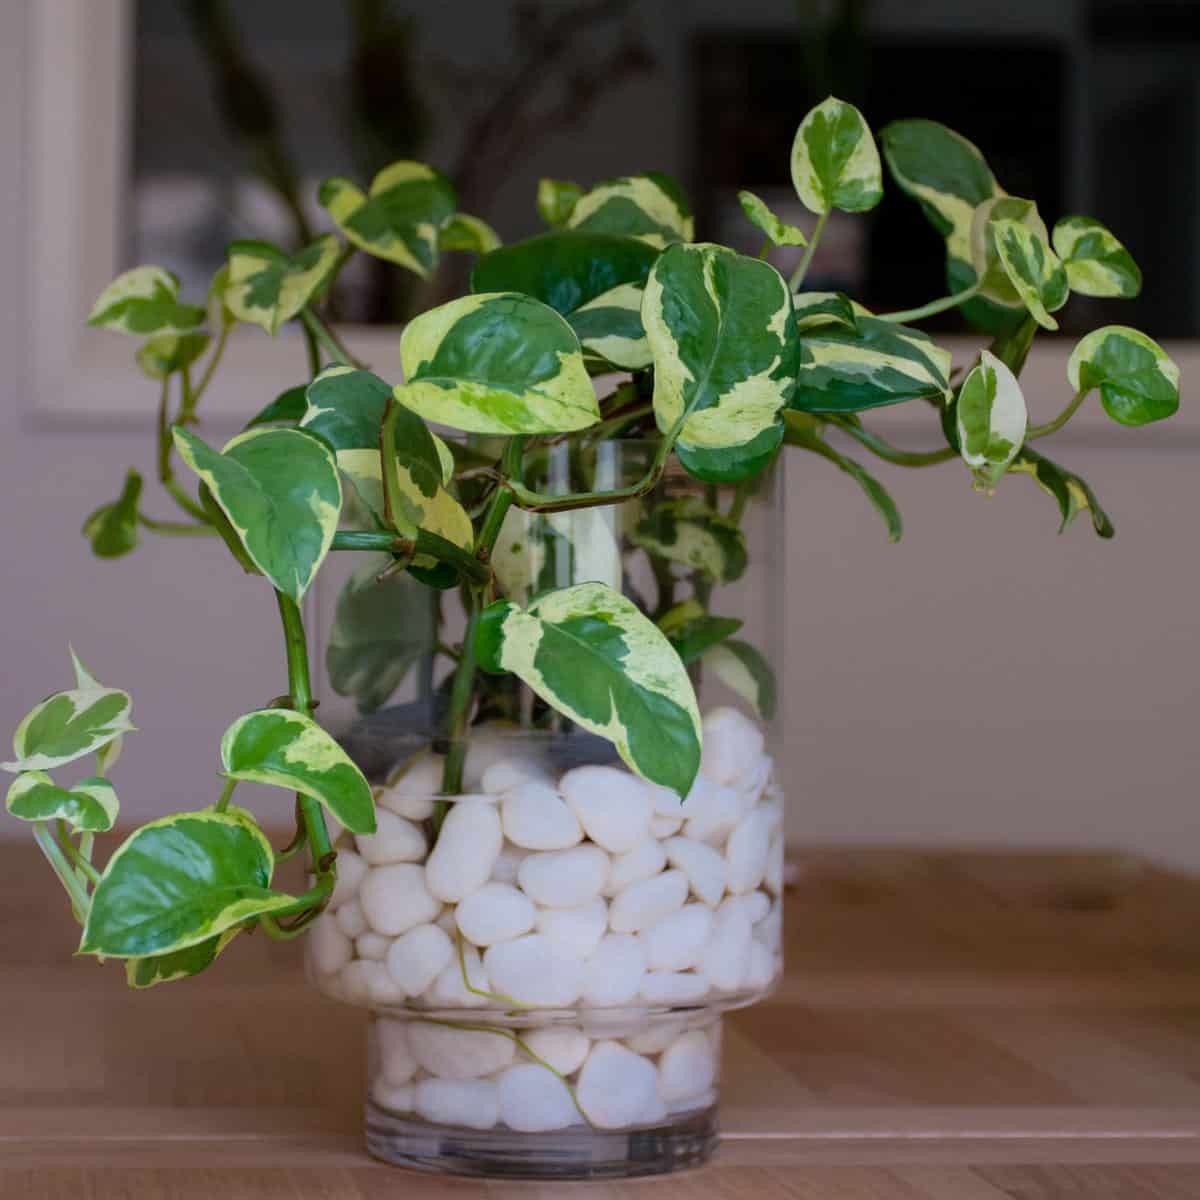 Stunning and gorgeous Glacier pothos